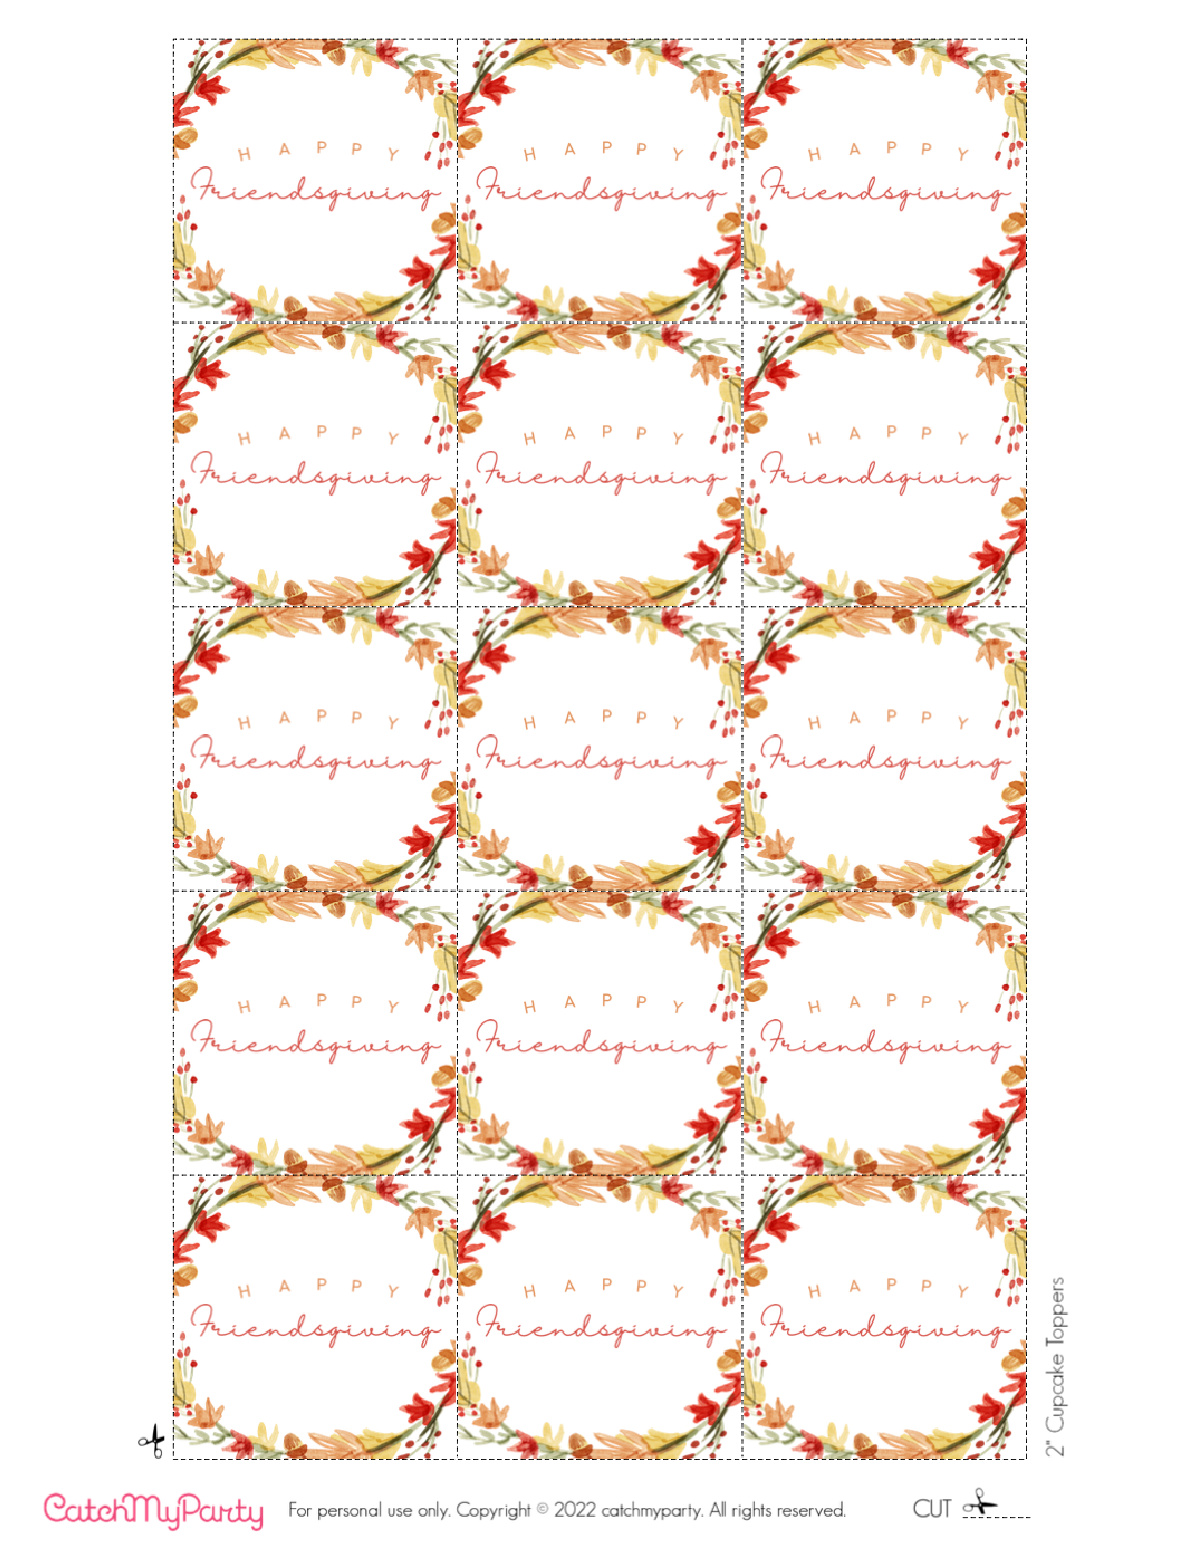 Download these FREE Friendsgiving Printables - Friendsgiving Cupcake Toppers